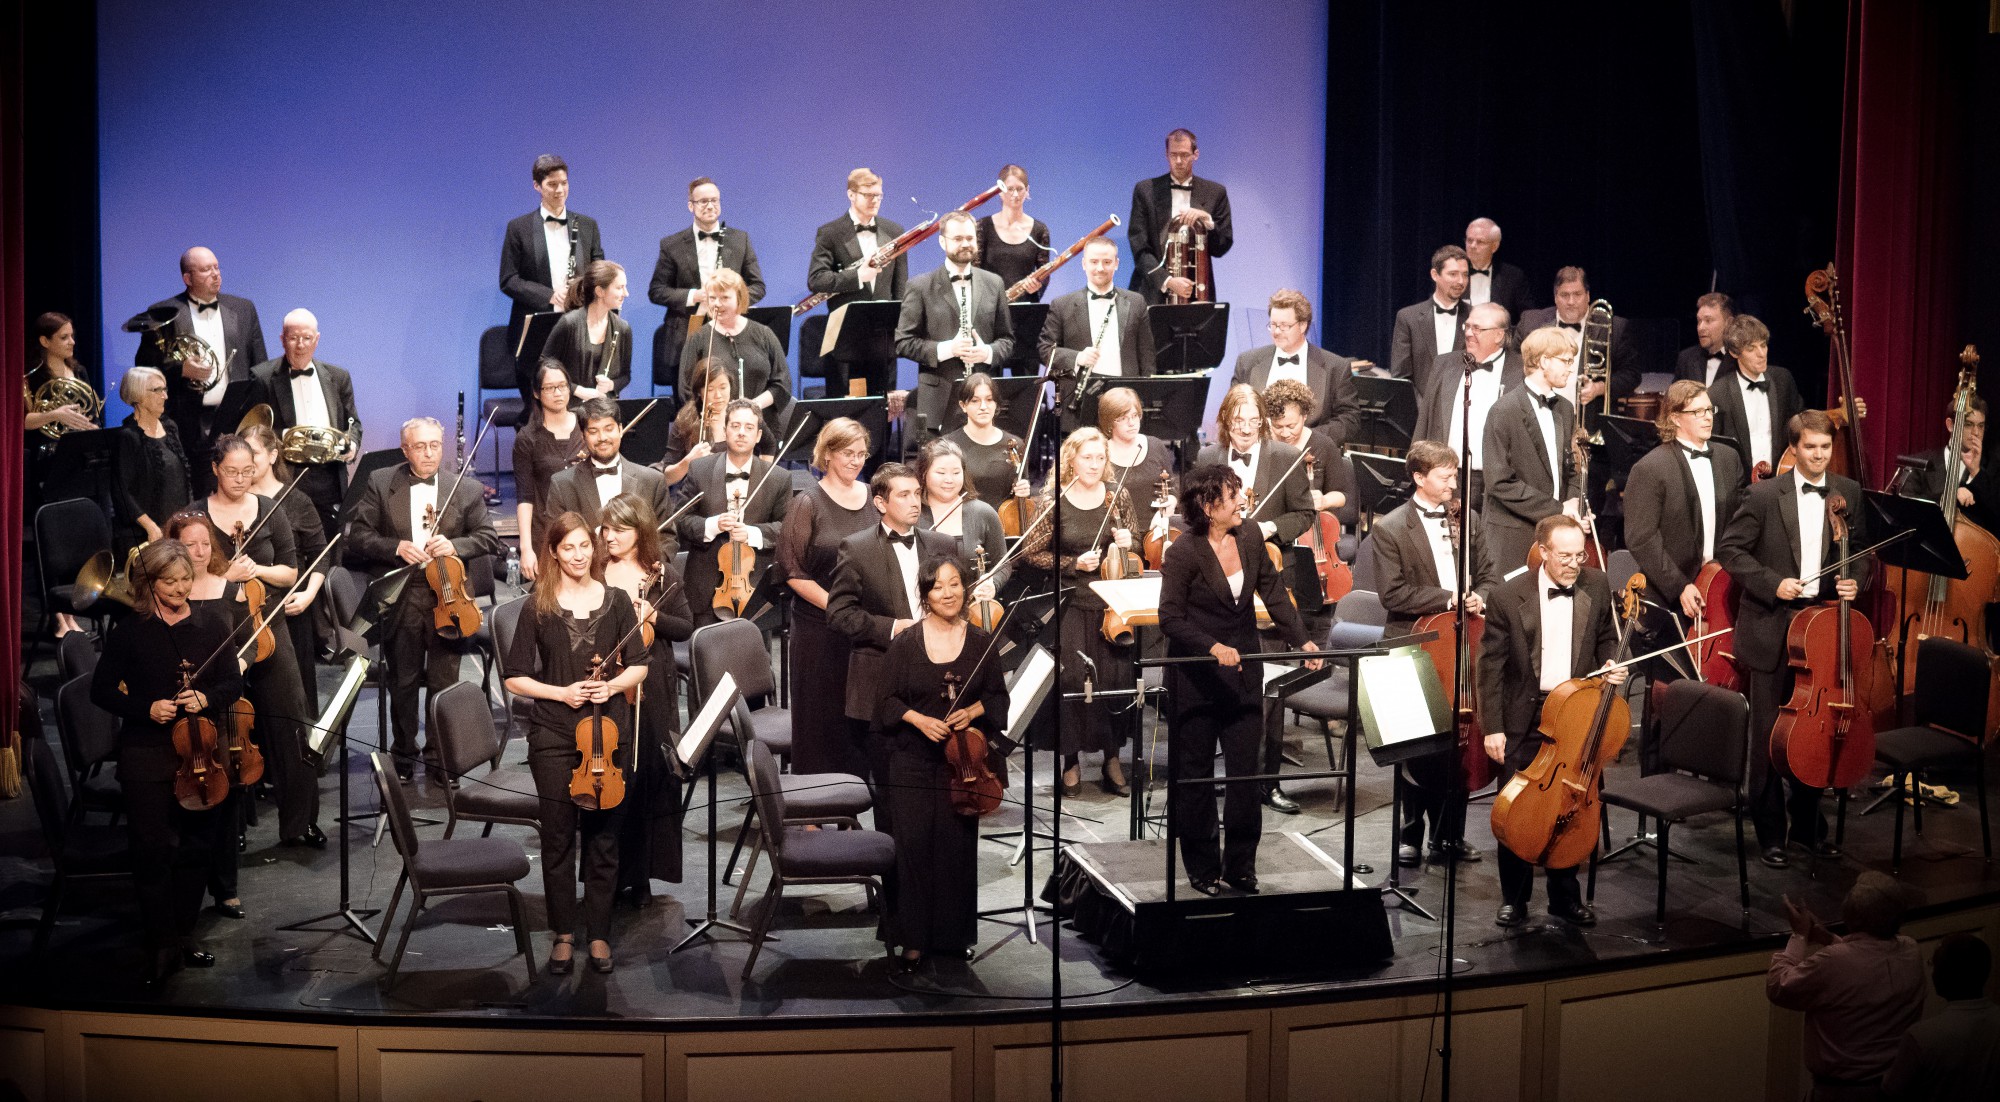 History of The Williamsburg Symphony Orchestra, formerly the Symphony